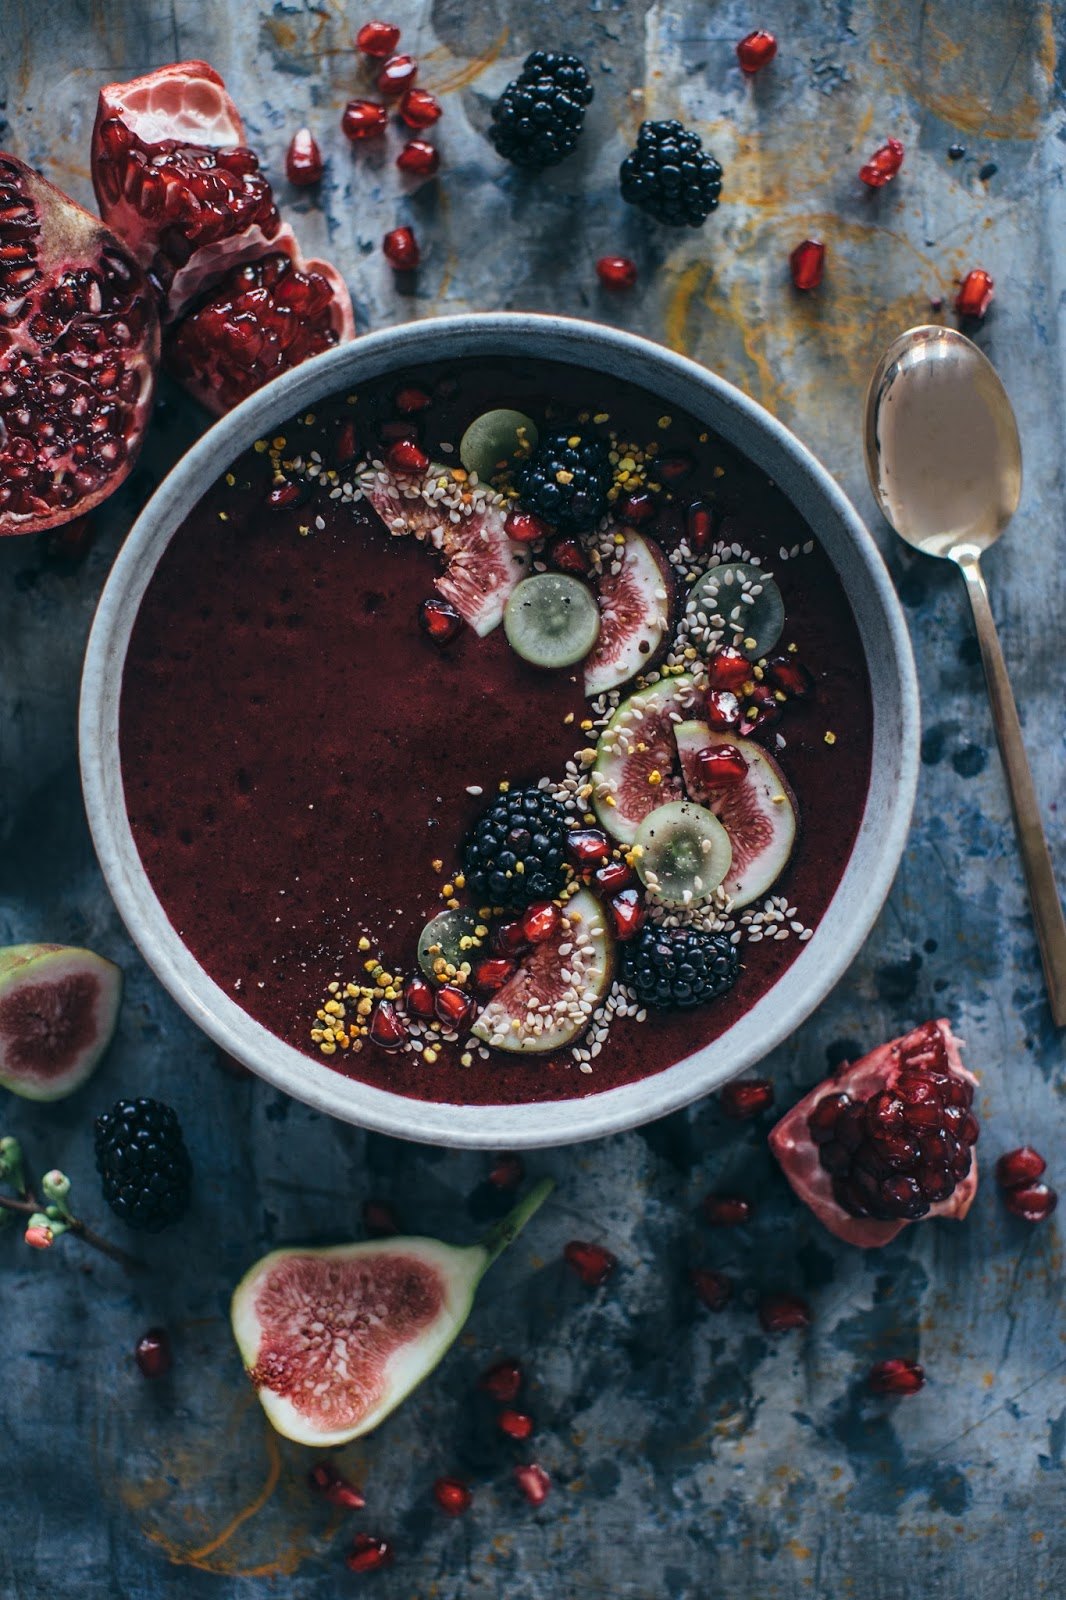 Smoothie Breakfast Bowl with Pommegrante Juice and the Pommegrante-Series from Weleda